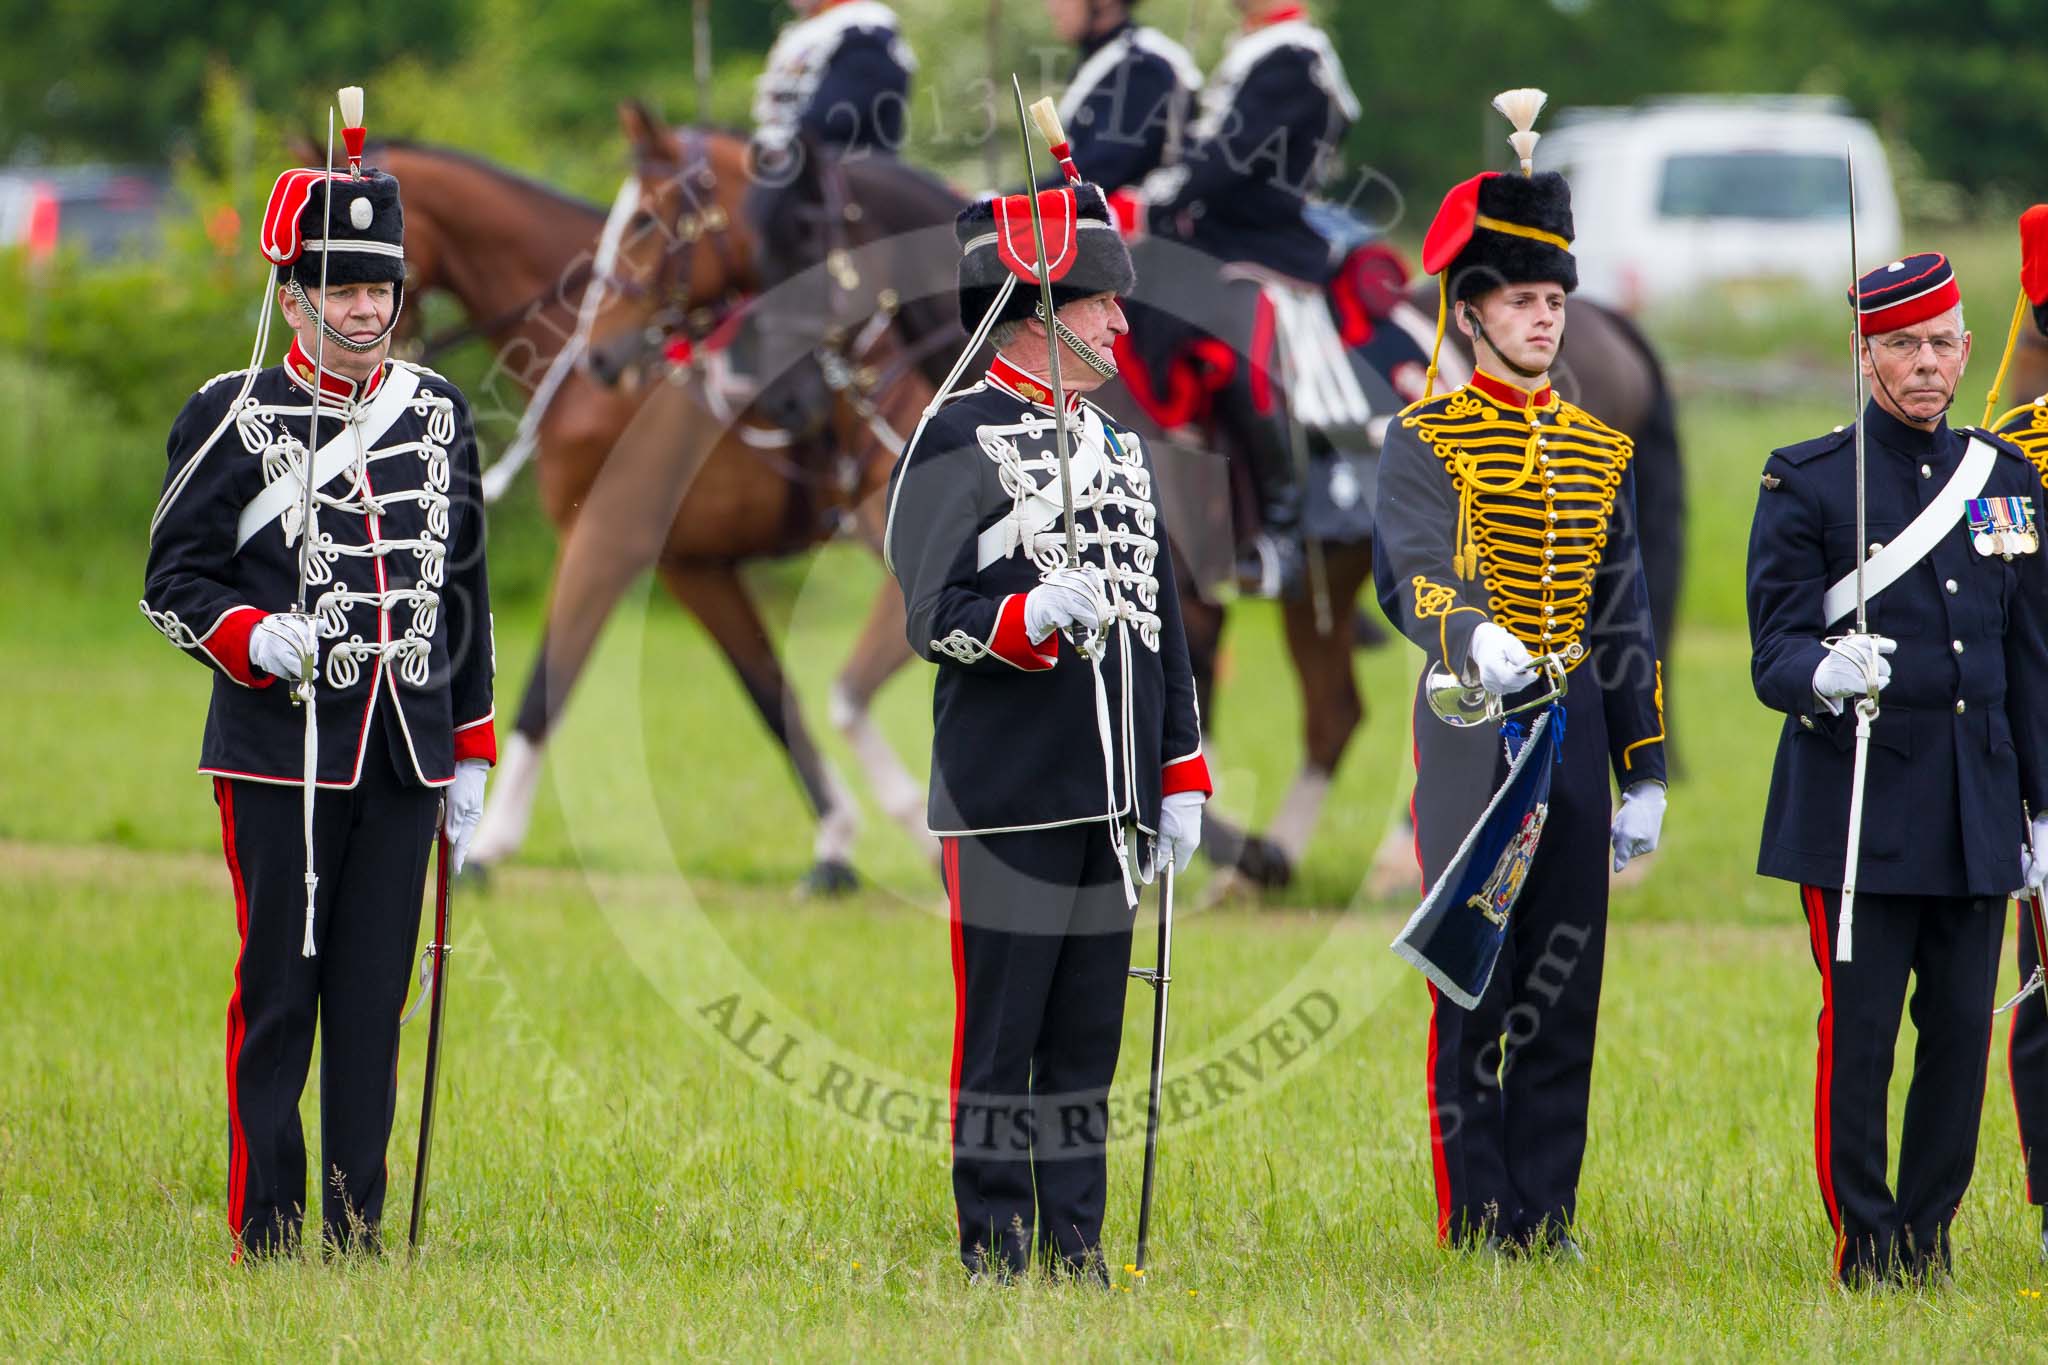 The Light Cavalry HAC Annual Review and Inspection 2013.
Windsor Great Park Review Ground,
Windsor,
Berkshire,
United Kingdom,
on 09 June 2013 at 13:31, image #398